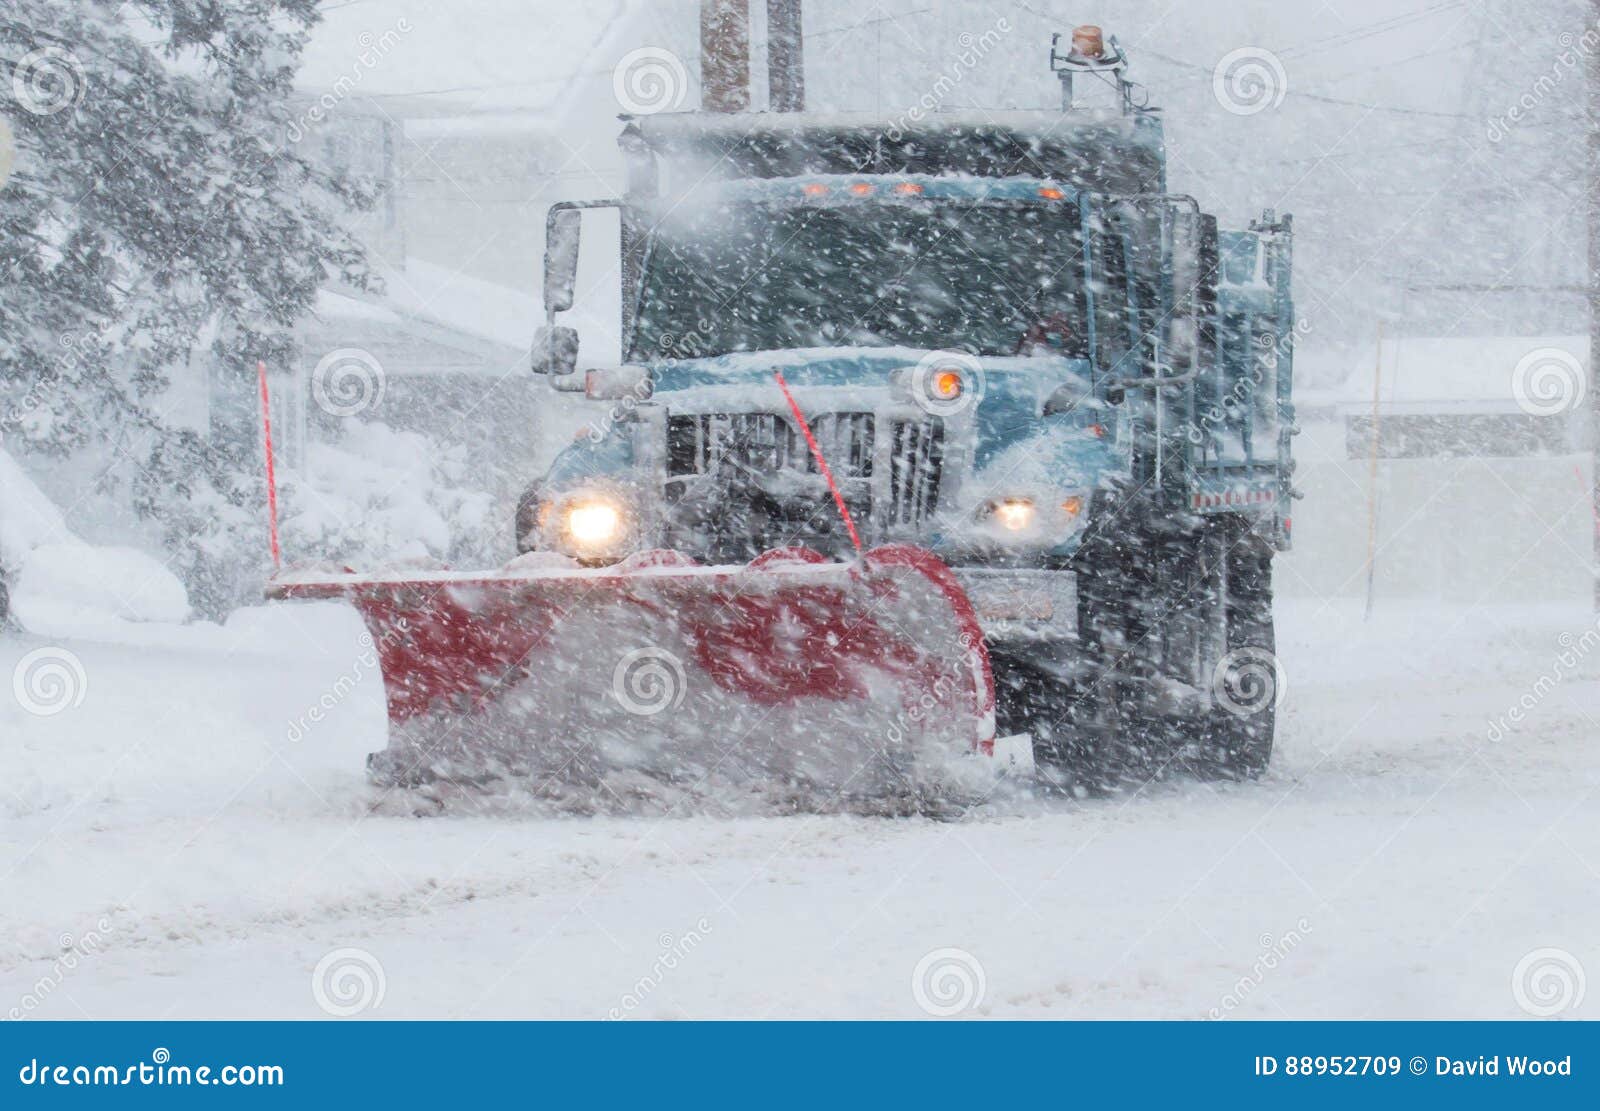 snow plow with a red plow working in a blizzard